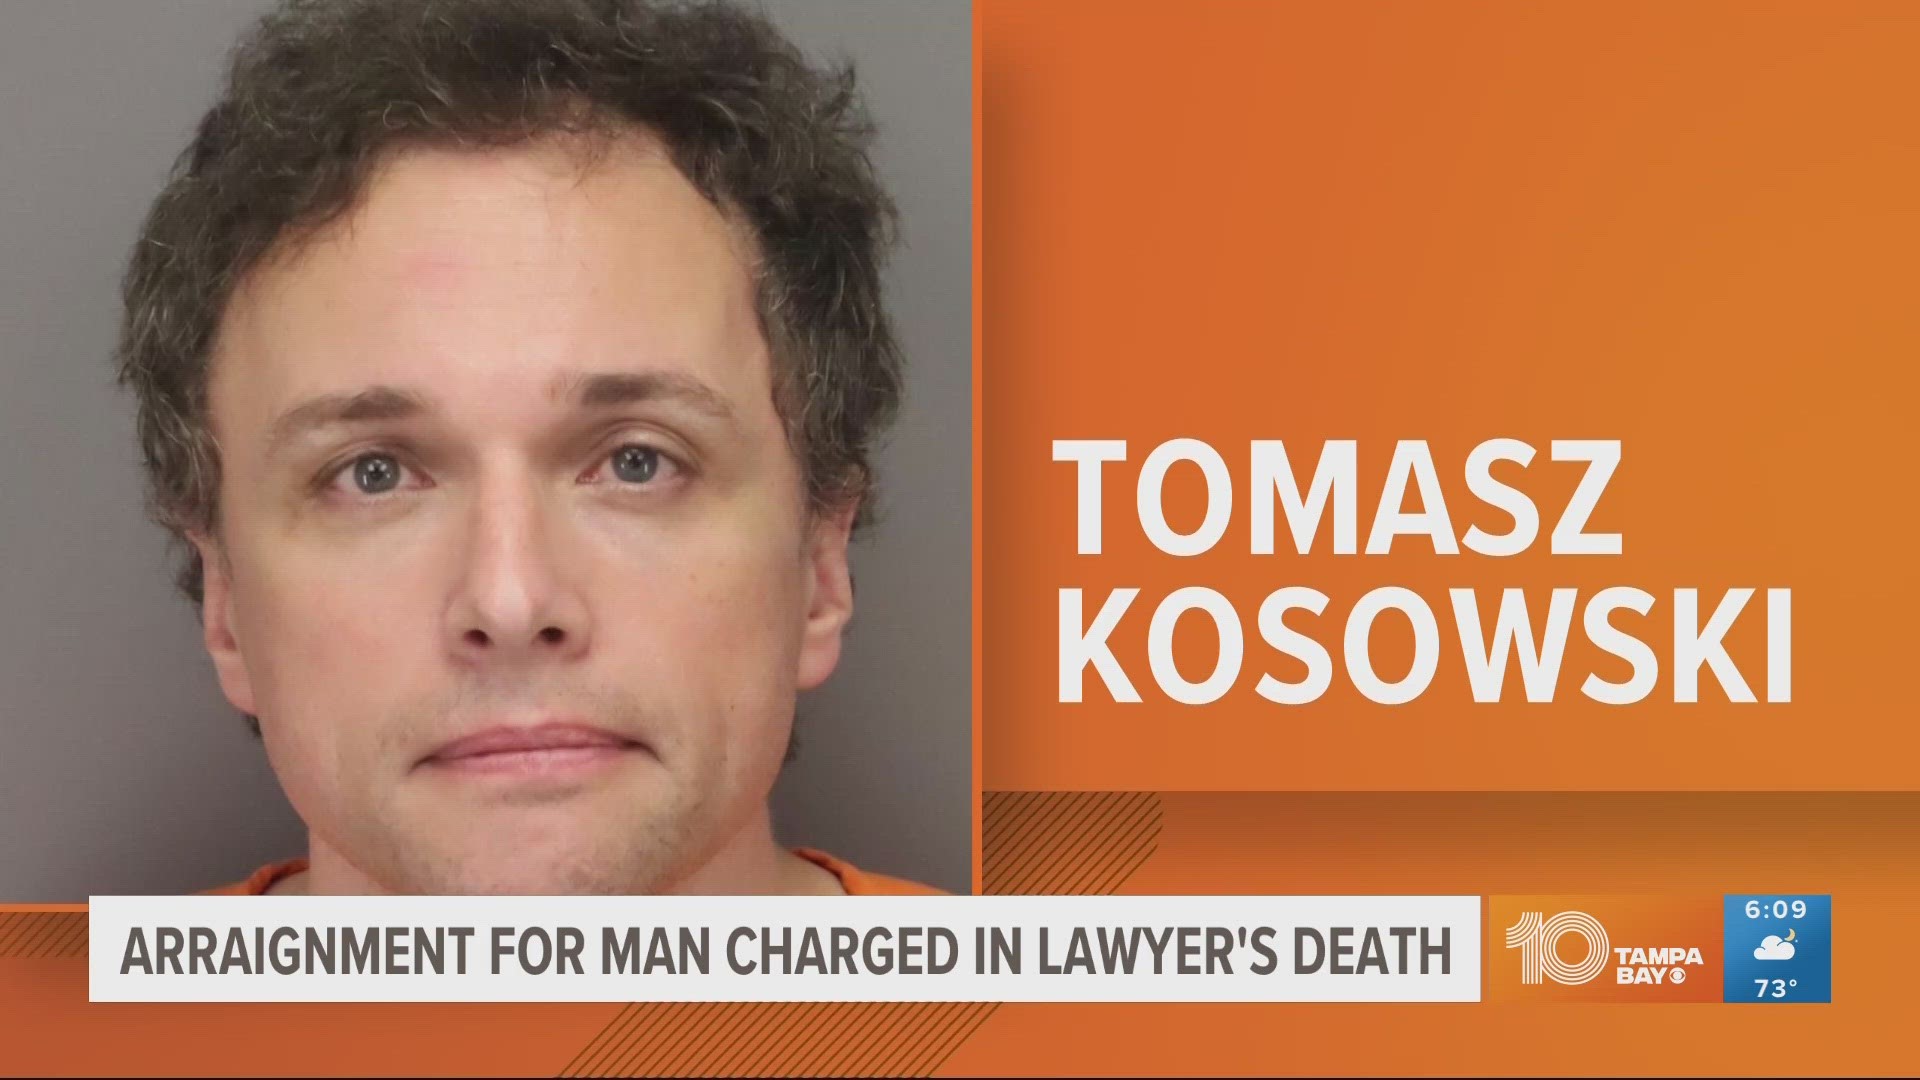 Tomasz Kosowski, 44, was arrested and charged with first-degree murder back in March.